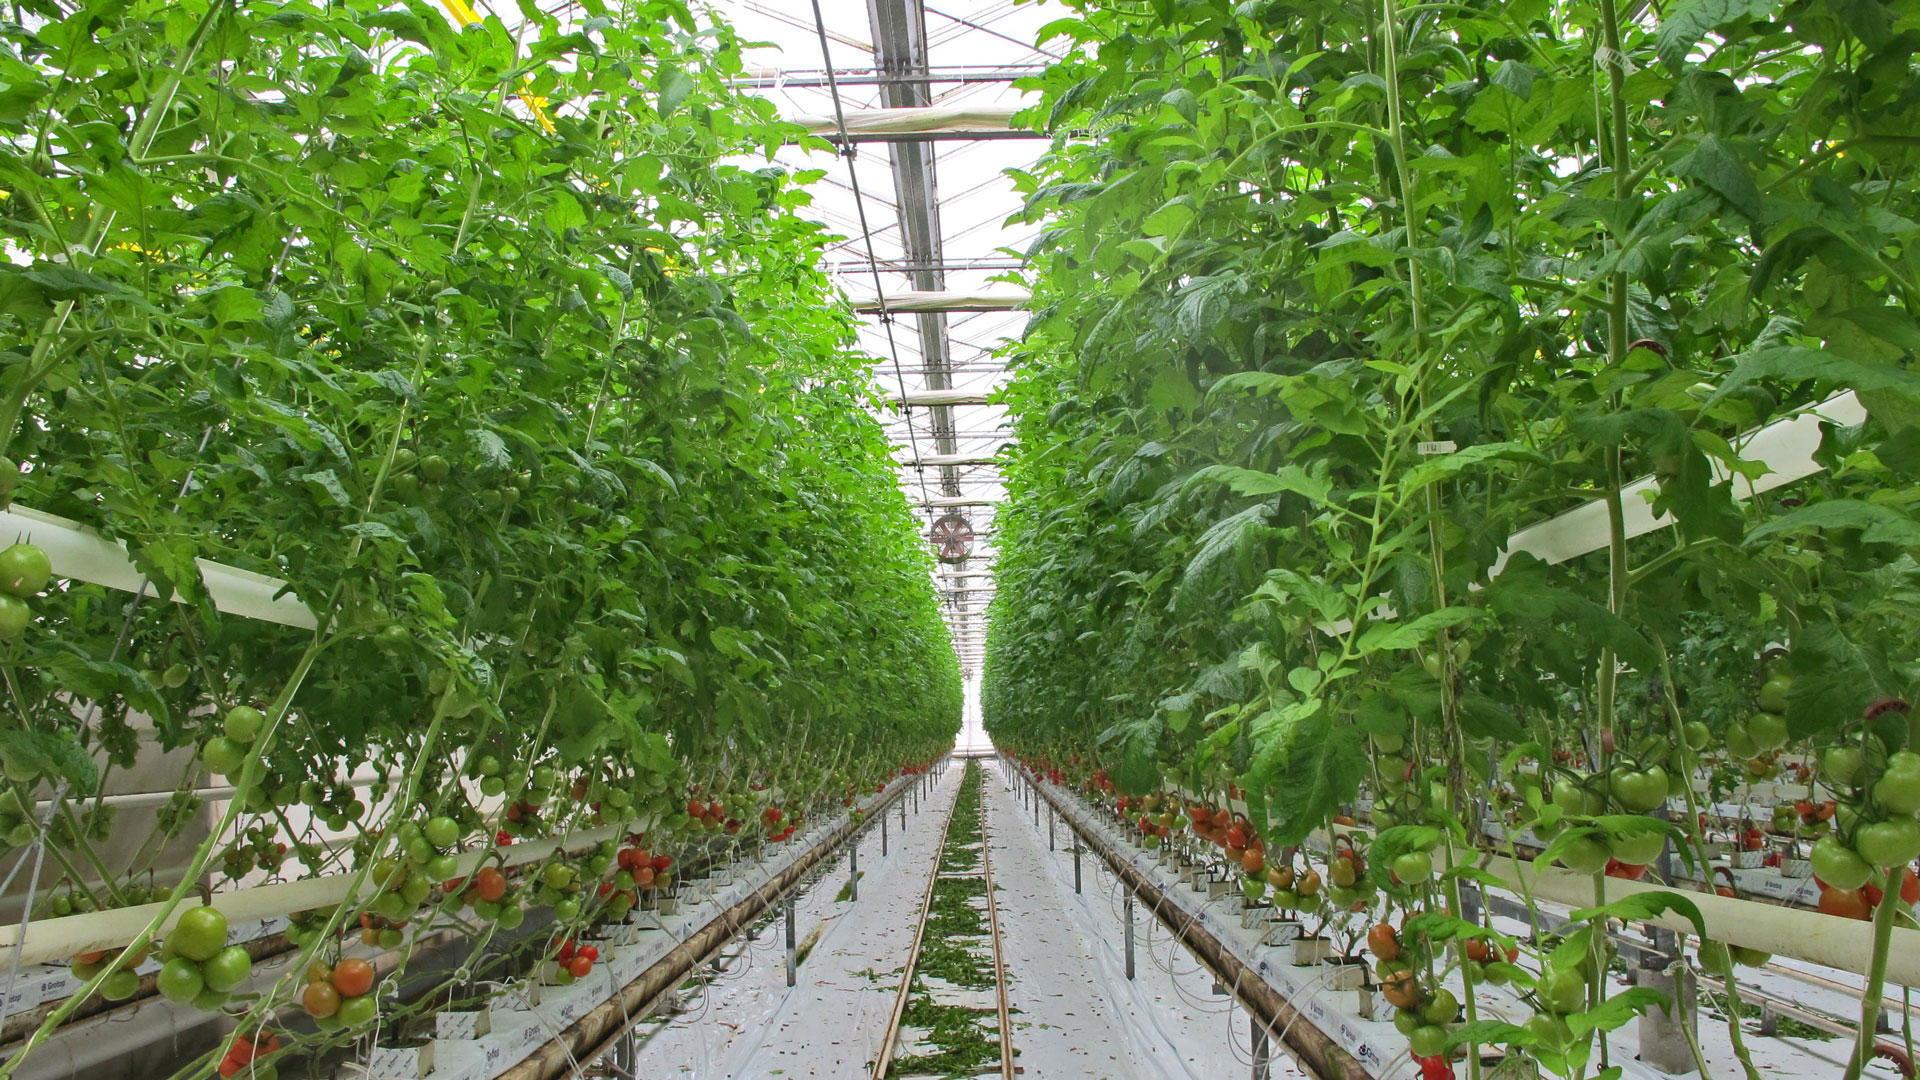 agriculture greenhouse